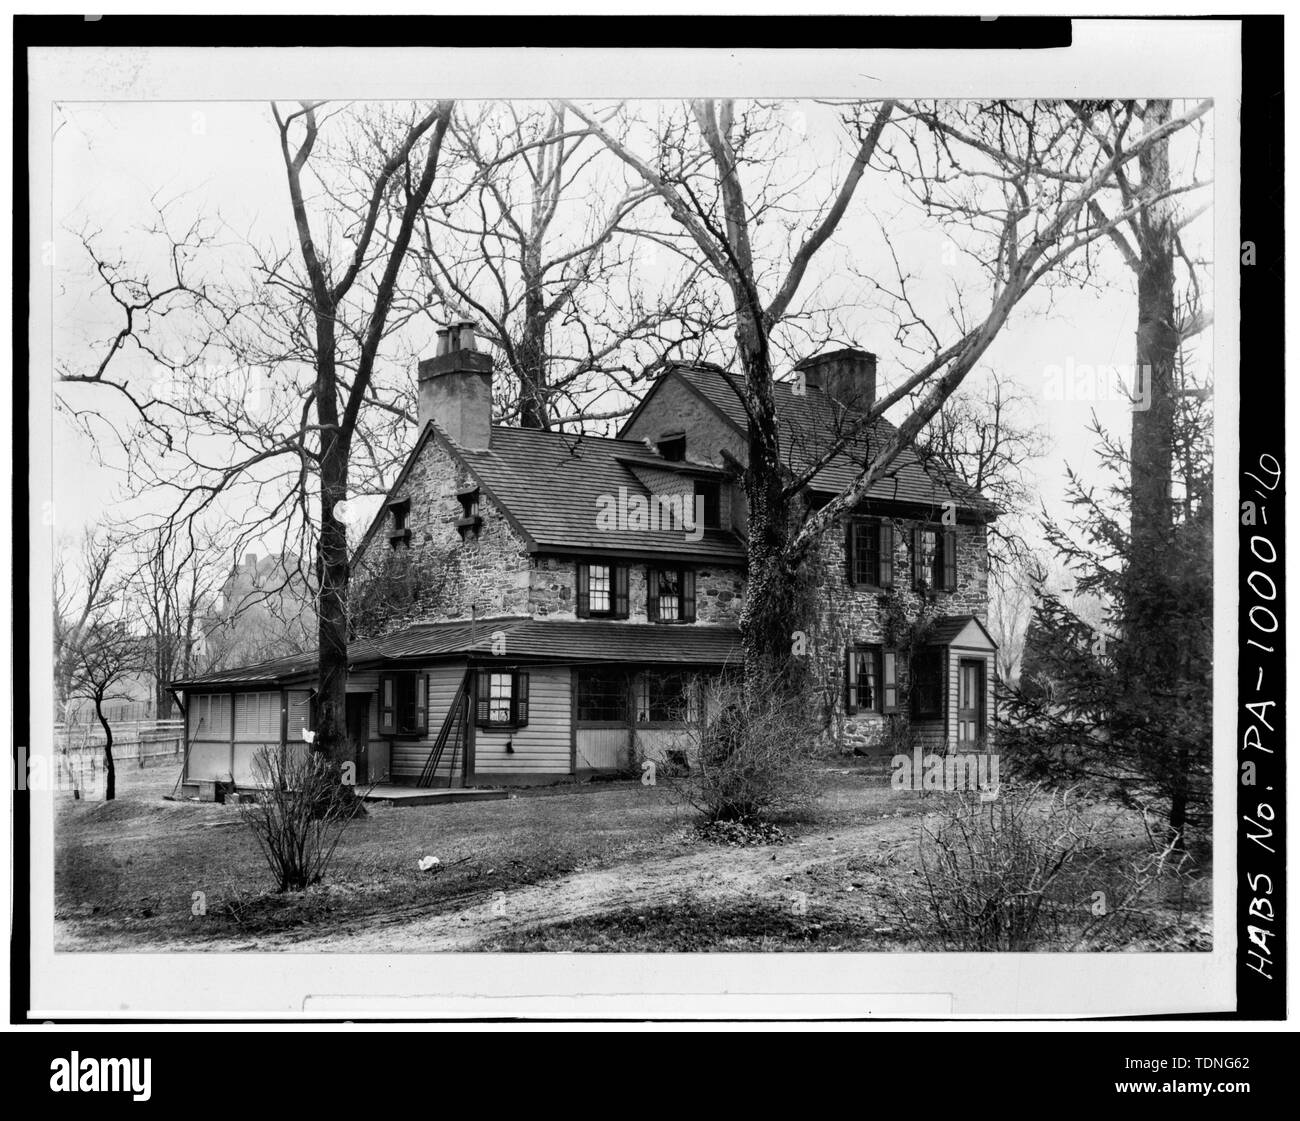 Photocopy of old photograph (Rural Pennsylvania Samuel Hotchkin, 1896, p. 221) SIDE AND FRONT ELEVATIONS, ORIGINAL HOUSE - Bolingbroke, King of Prussia Road (Radnor Township), Radnor, Delaware County, PA Stock Photo